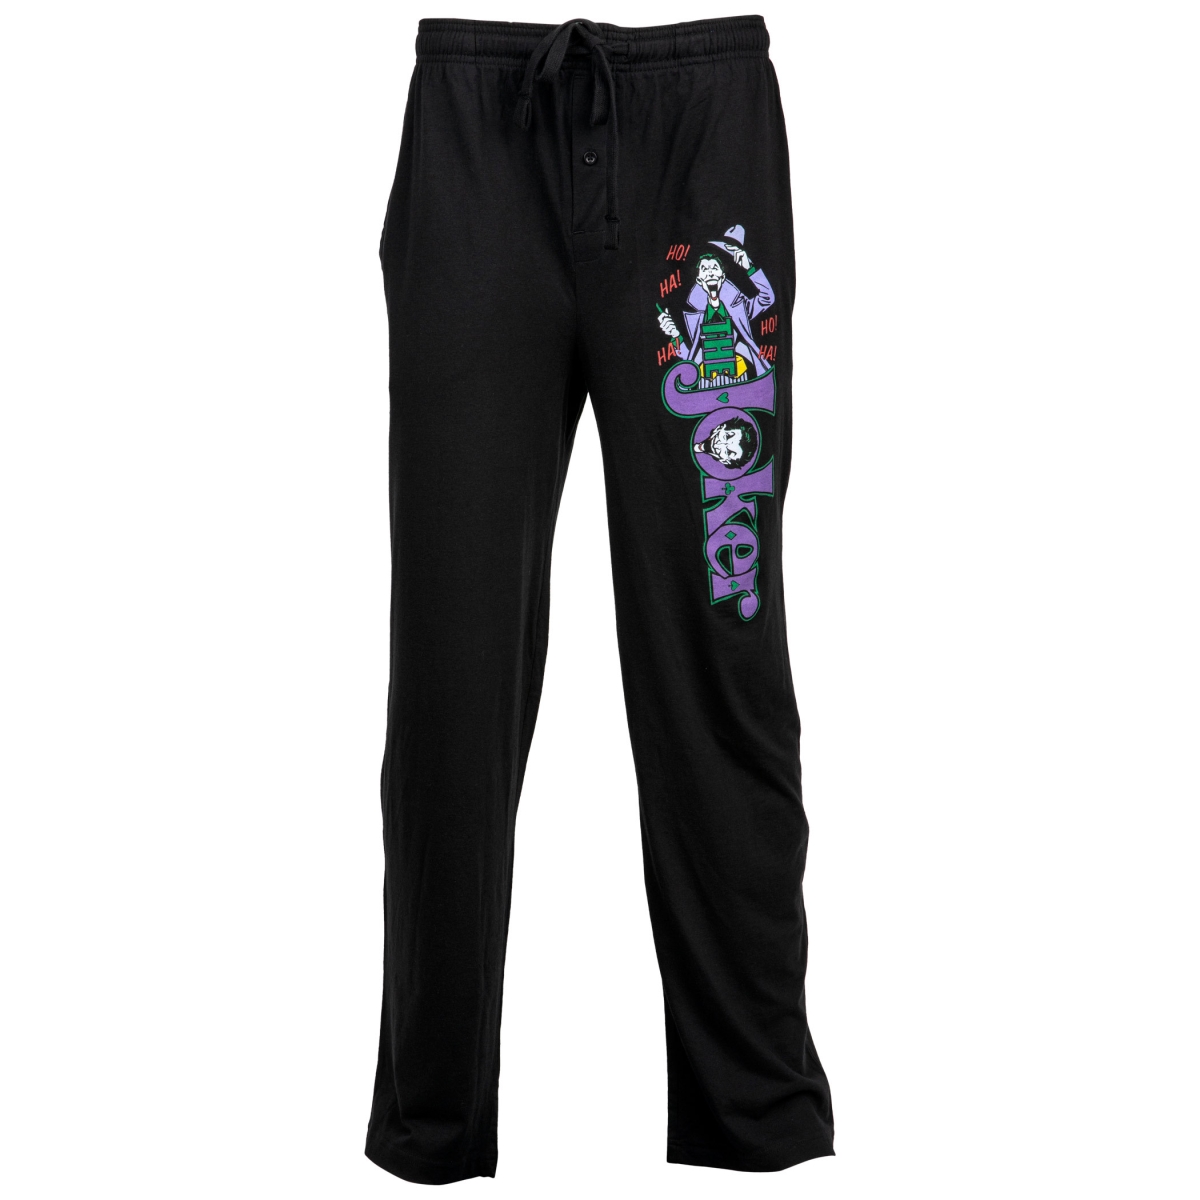 Picture of Joker 810754-large 36-38 The Joker Character Over Text Unisex Sleep Pants, Large 36-38